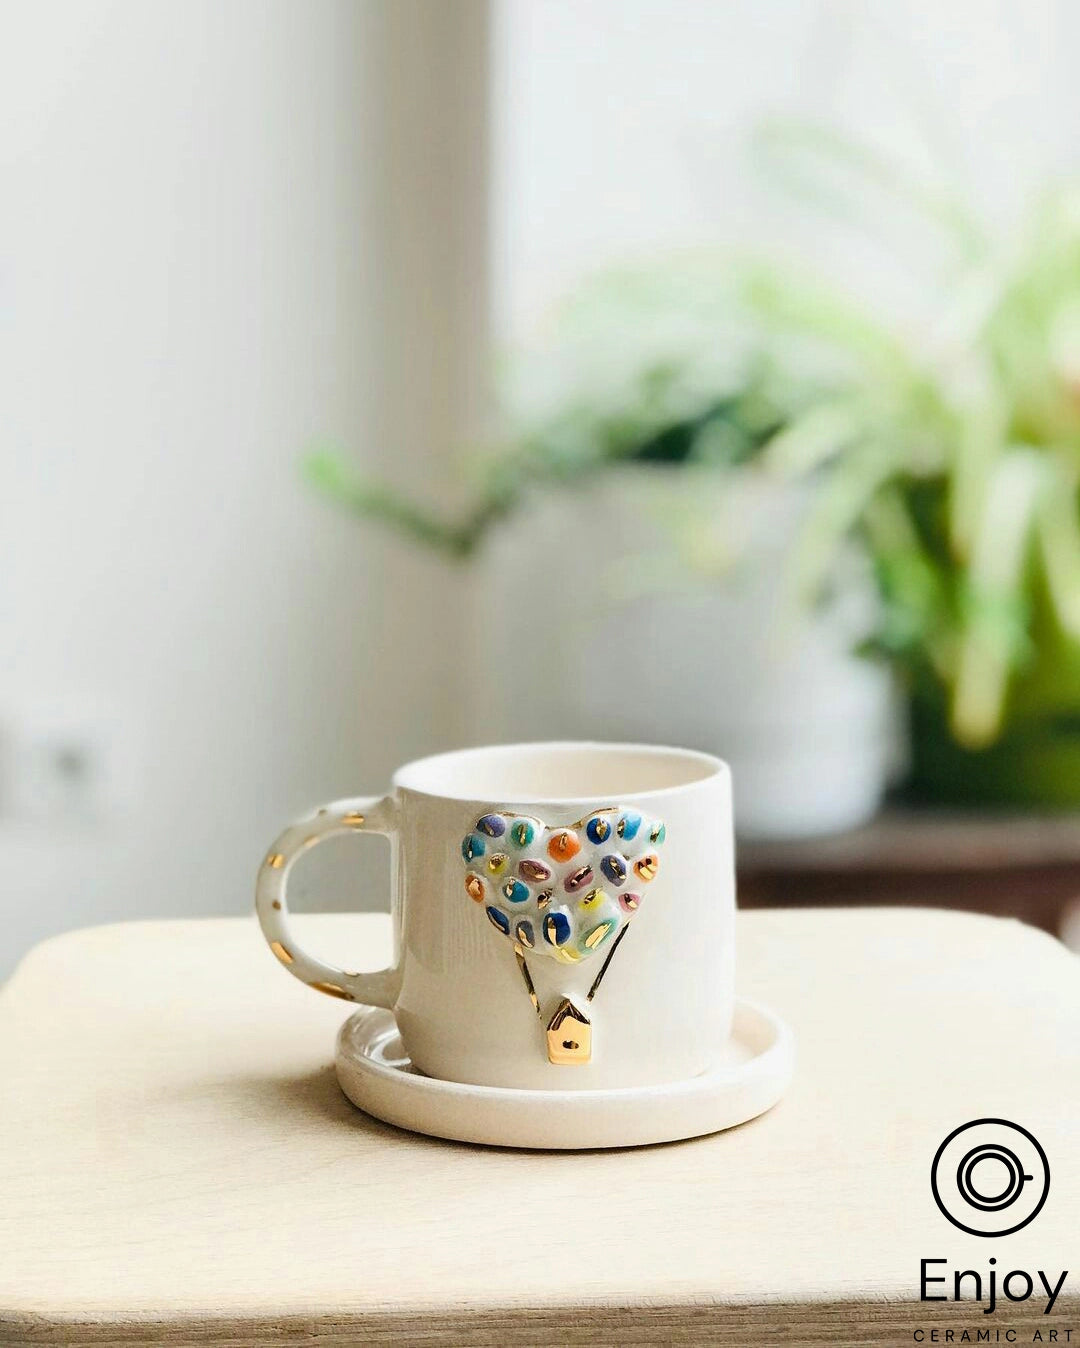 Disney Pixar's 'Up' Themed Ceramic Espresso Cup & Saucer Set - Handmade Carl and Ellie Coffee Cup - Perfect for Espresso Lovers and Disney Fans